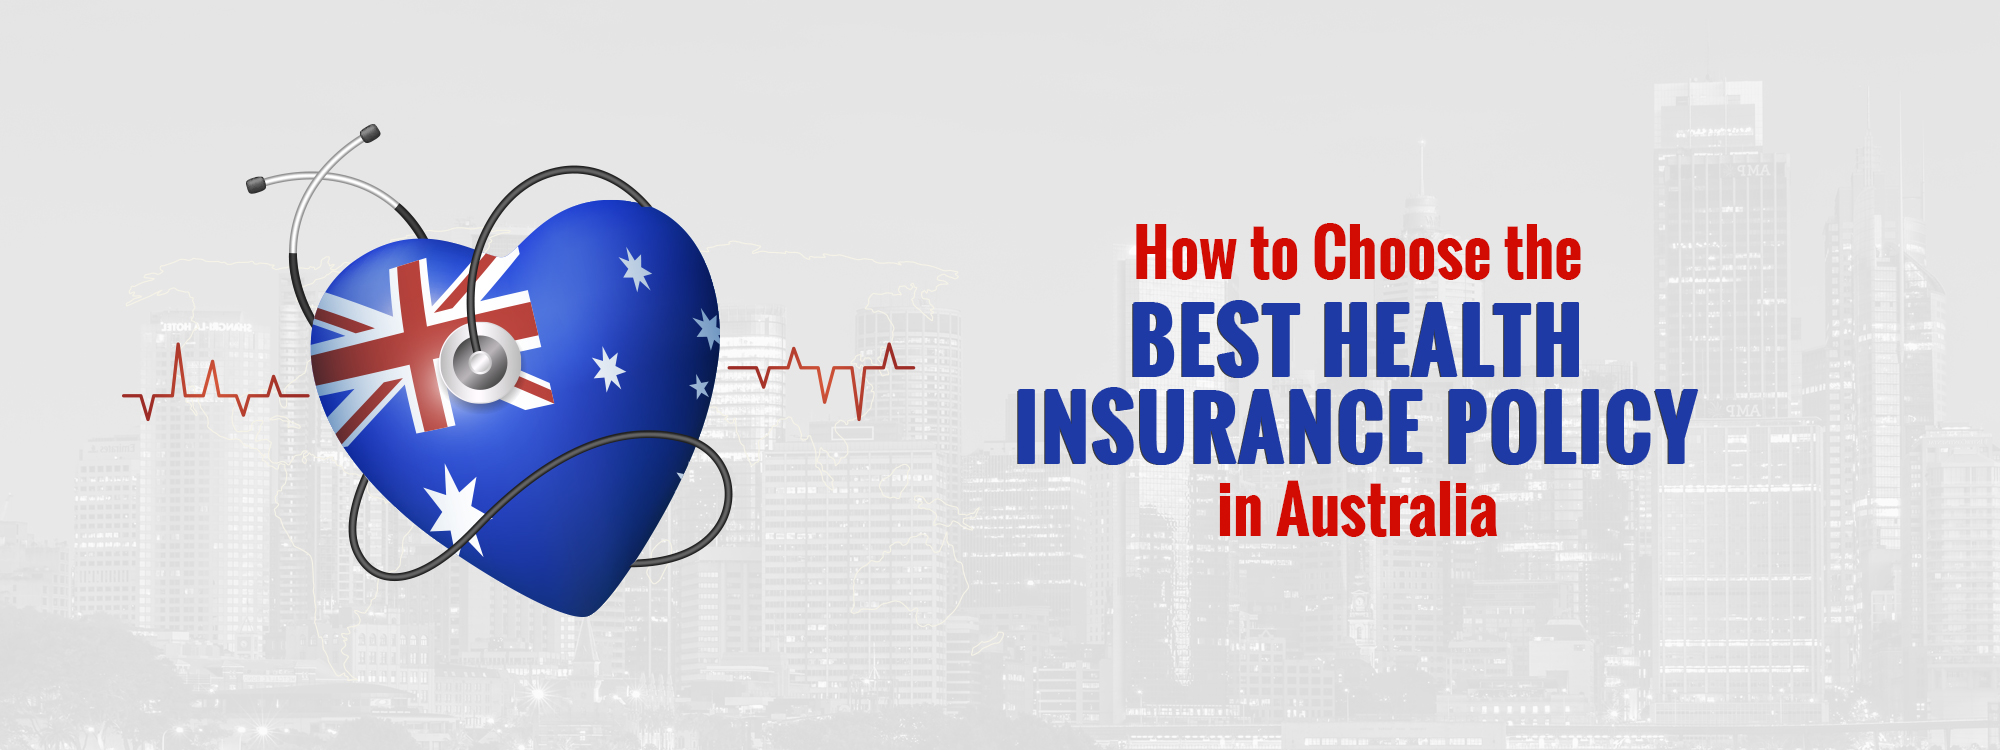 Choose the Best Health Insurance Policy in Australia